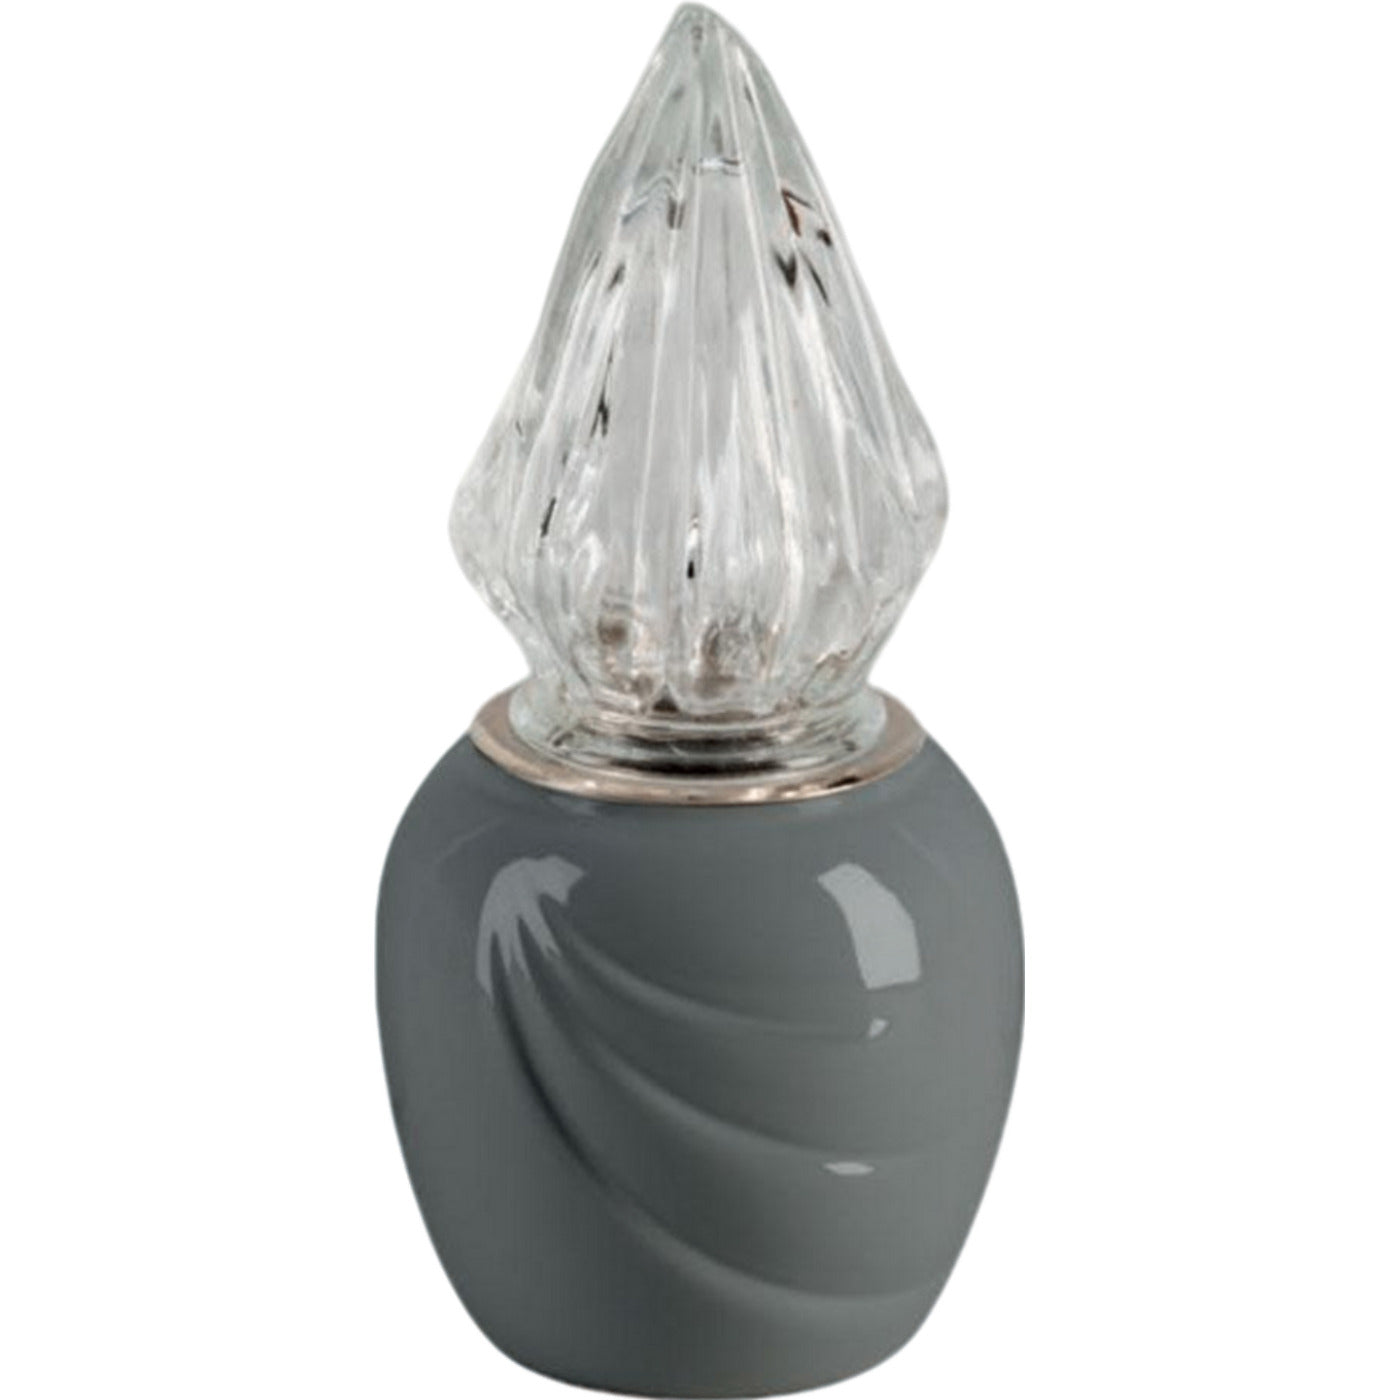 Grave light Ecotre gray 10x10cm - 3.9x3.9in In gray porcelain, ground attached ECO152T/G